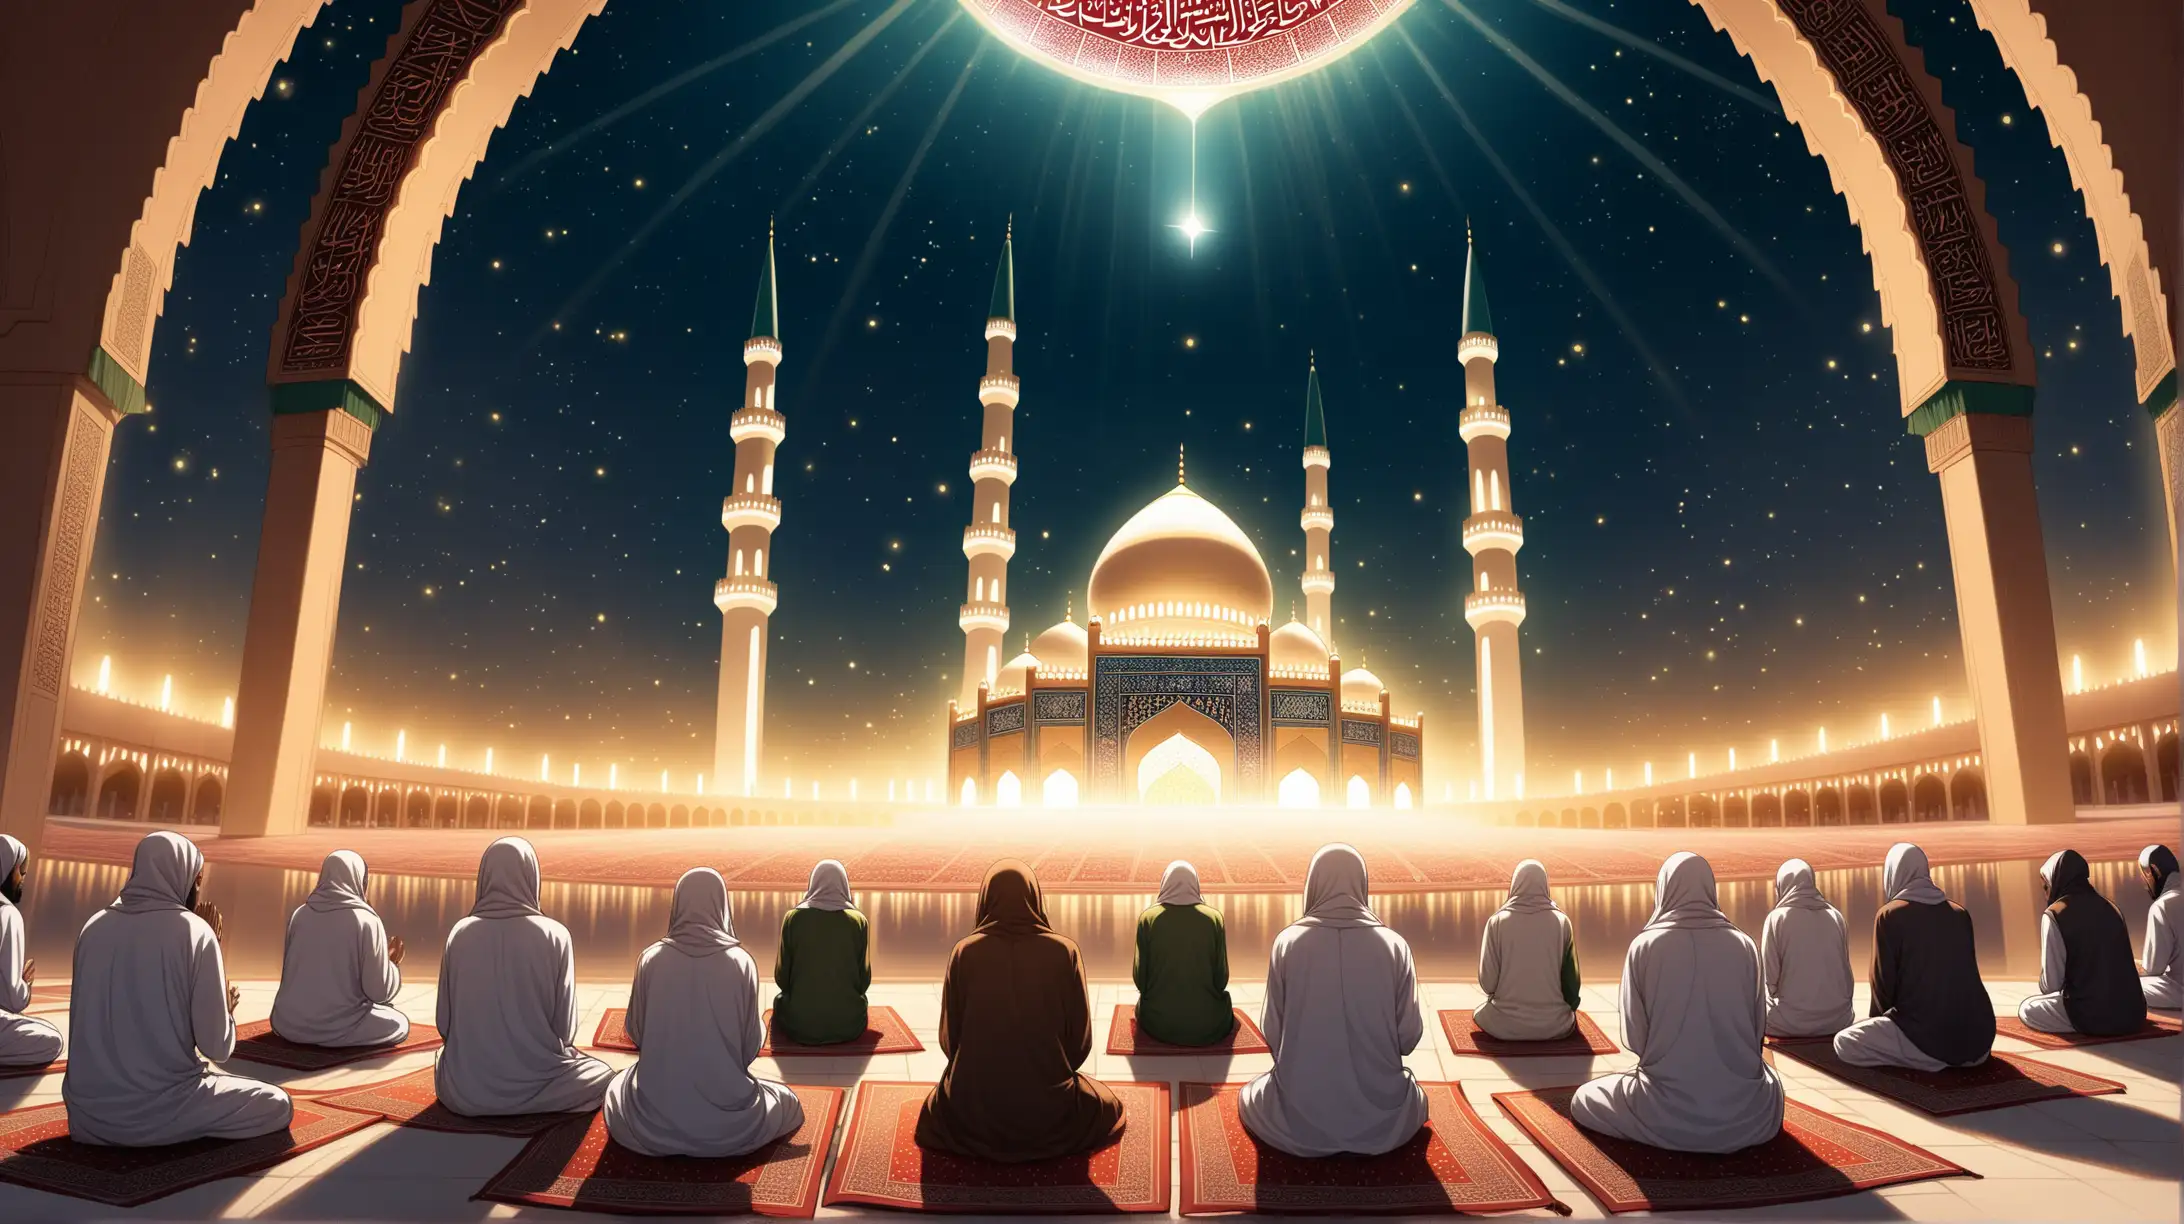 Peaceful Mosque Scene with Worshippers and Glowing Light